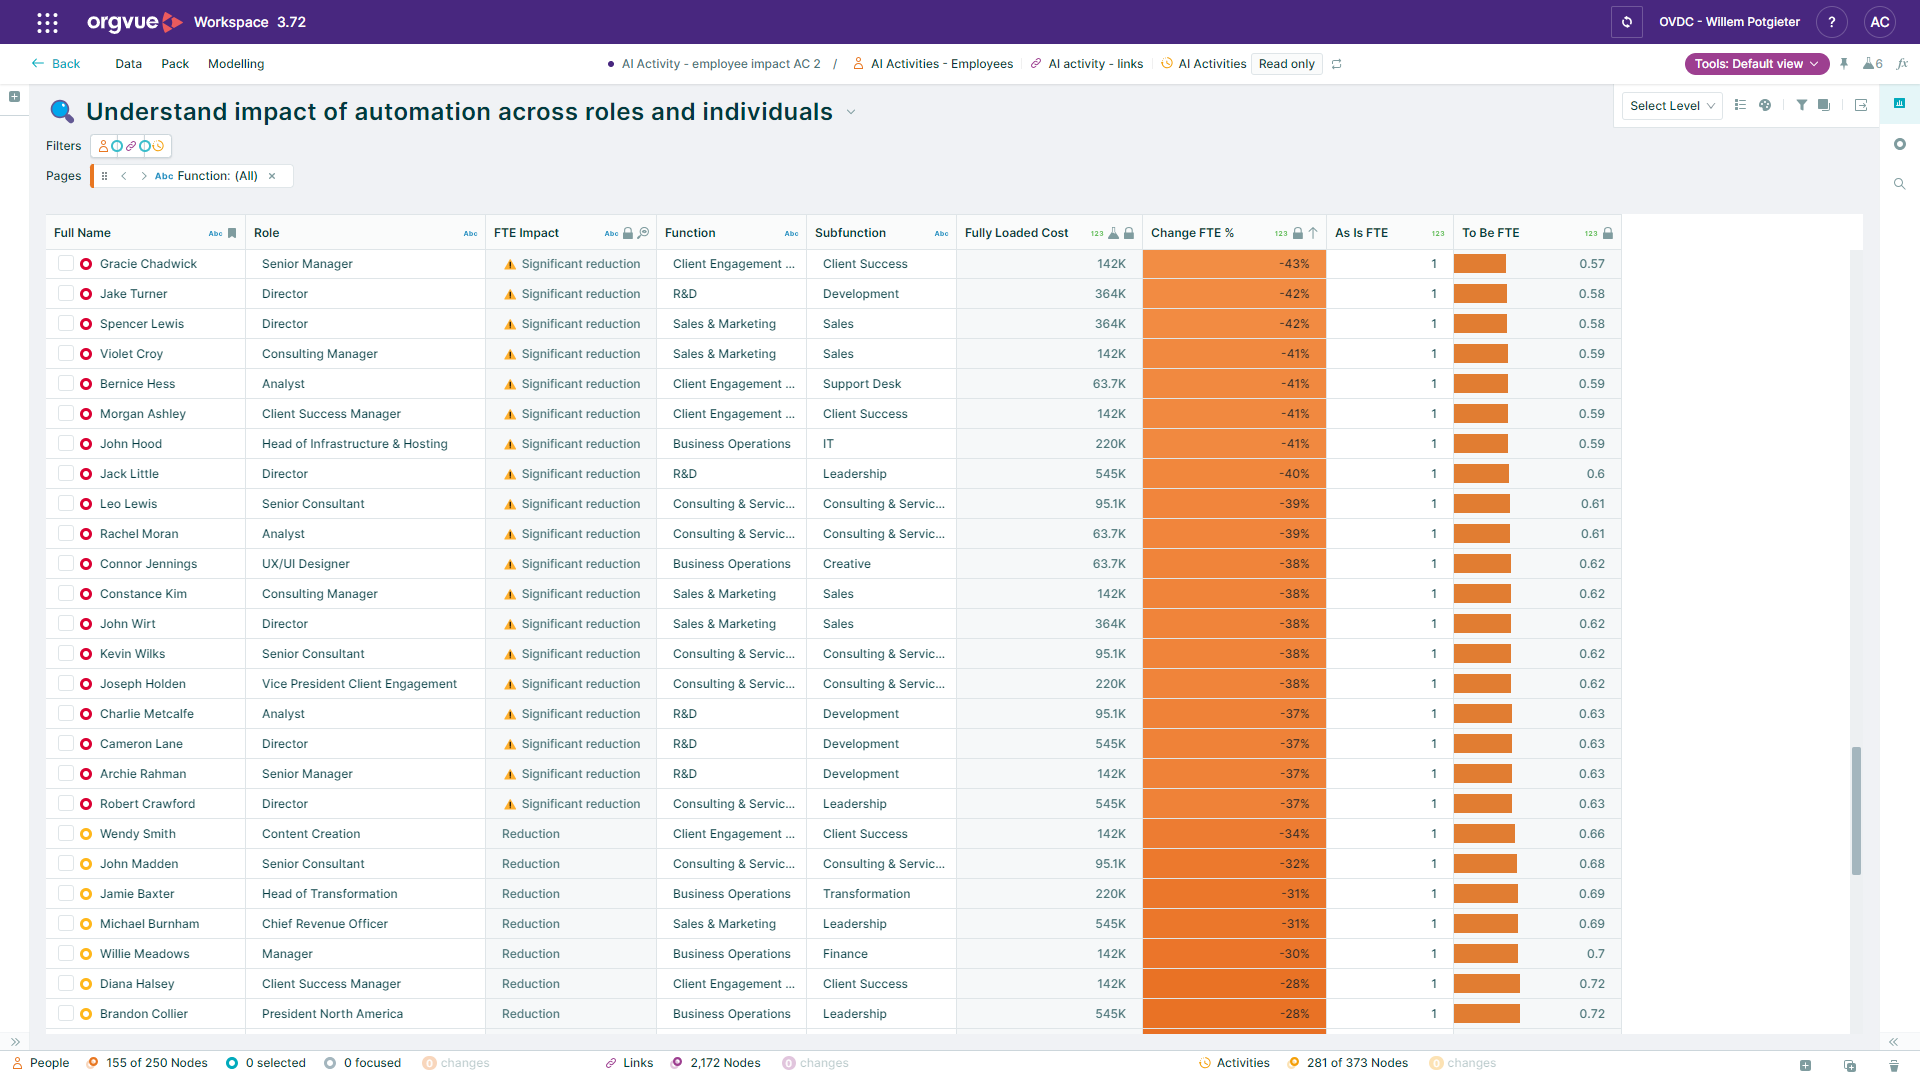 A screenshot from Orgvue - 'Understand the impact of automation across roles and individuals'